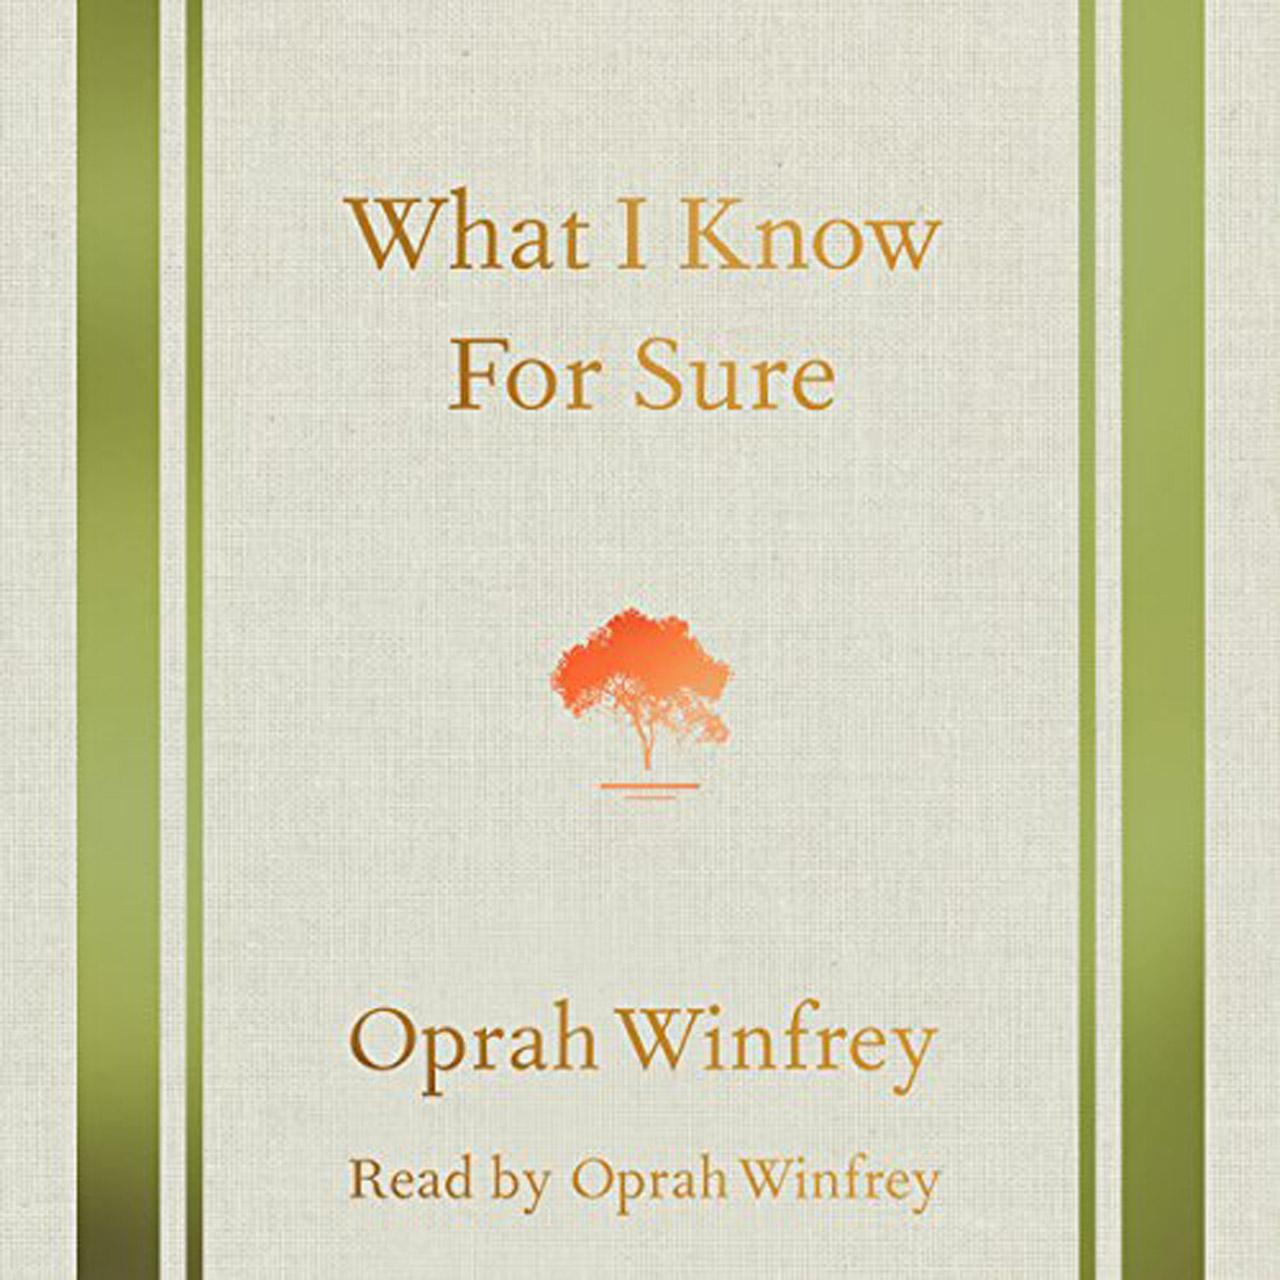 Oprah Winfrey - What I Know For Sure
An American television personality, actress, entrepreneur whose syndicated daily talk show, The Oprah Winfrey Show, led her to become one of the richest and most influential women in the United States. Her memoir is beautifully packed with insights and revelations about her life. Candid, moving, exhilarating, uplifting, and dynamic, the words Oprah shares in What I Know For Sure shimmer with the sort of wisdom and truth that listeners will turn to again and again.